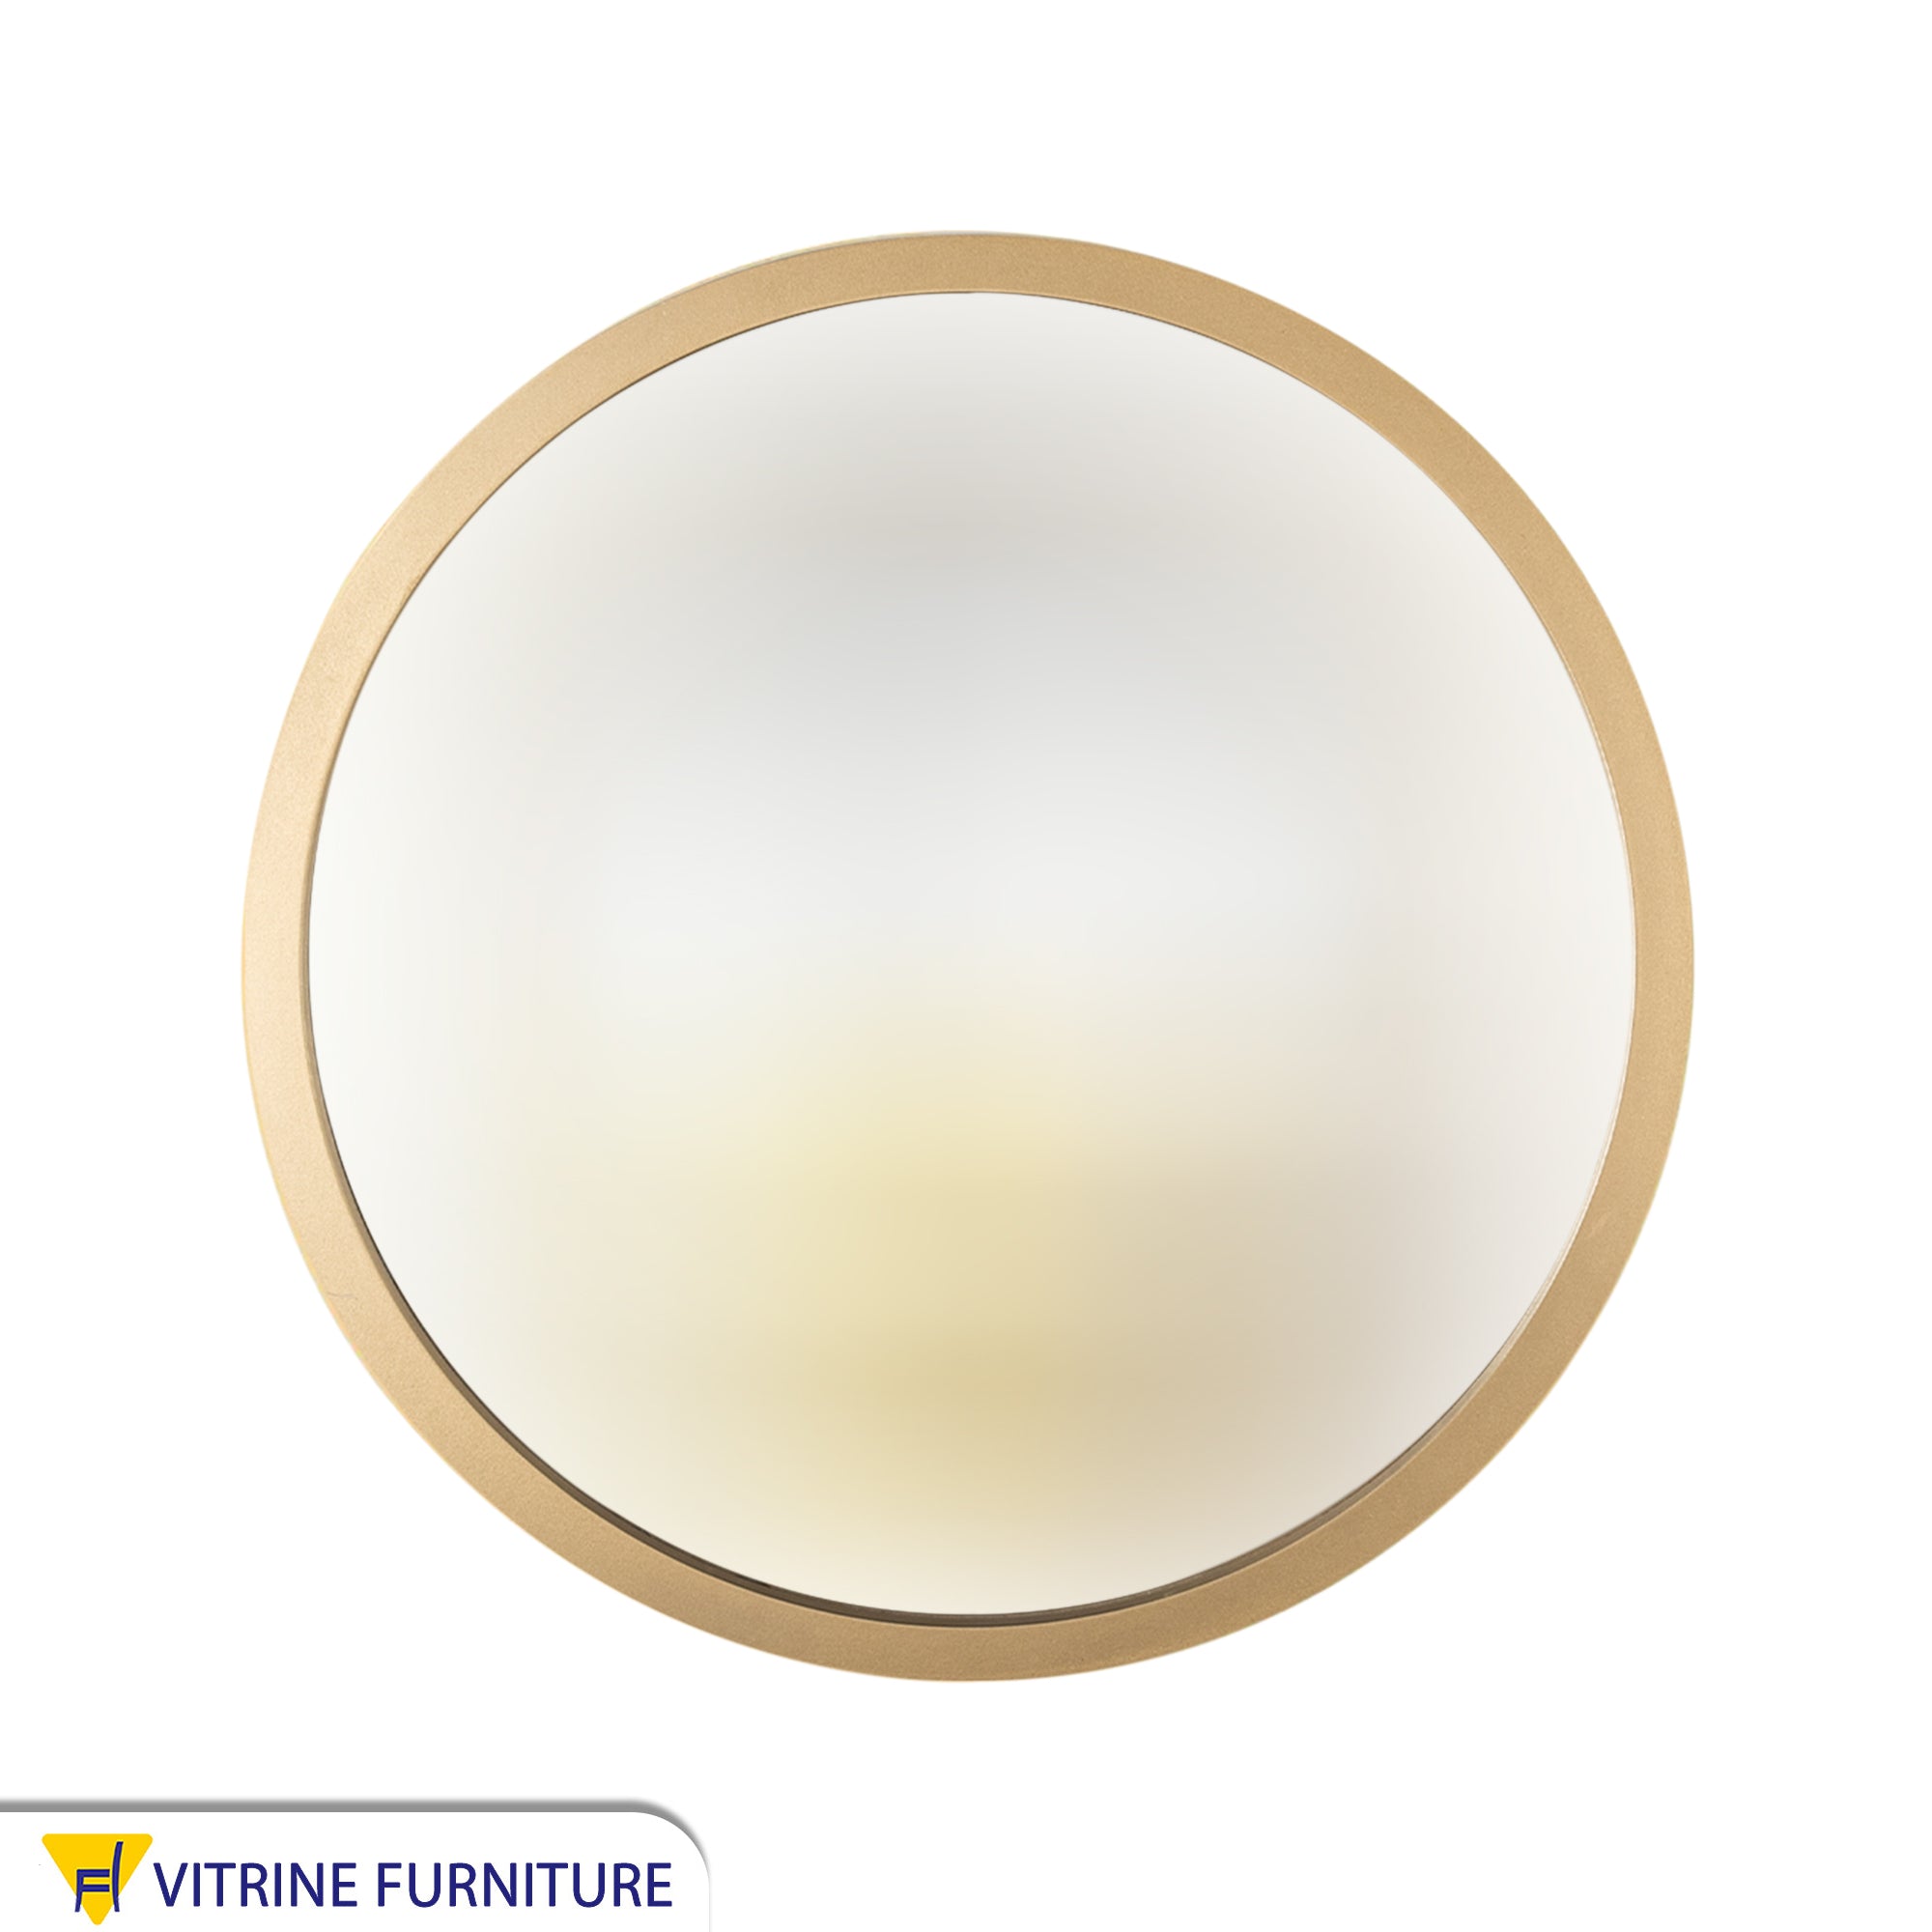 Round mirror, 70 cm in diameter, with a wide wooden frame in golden color